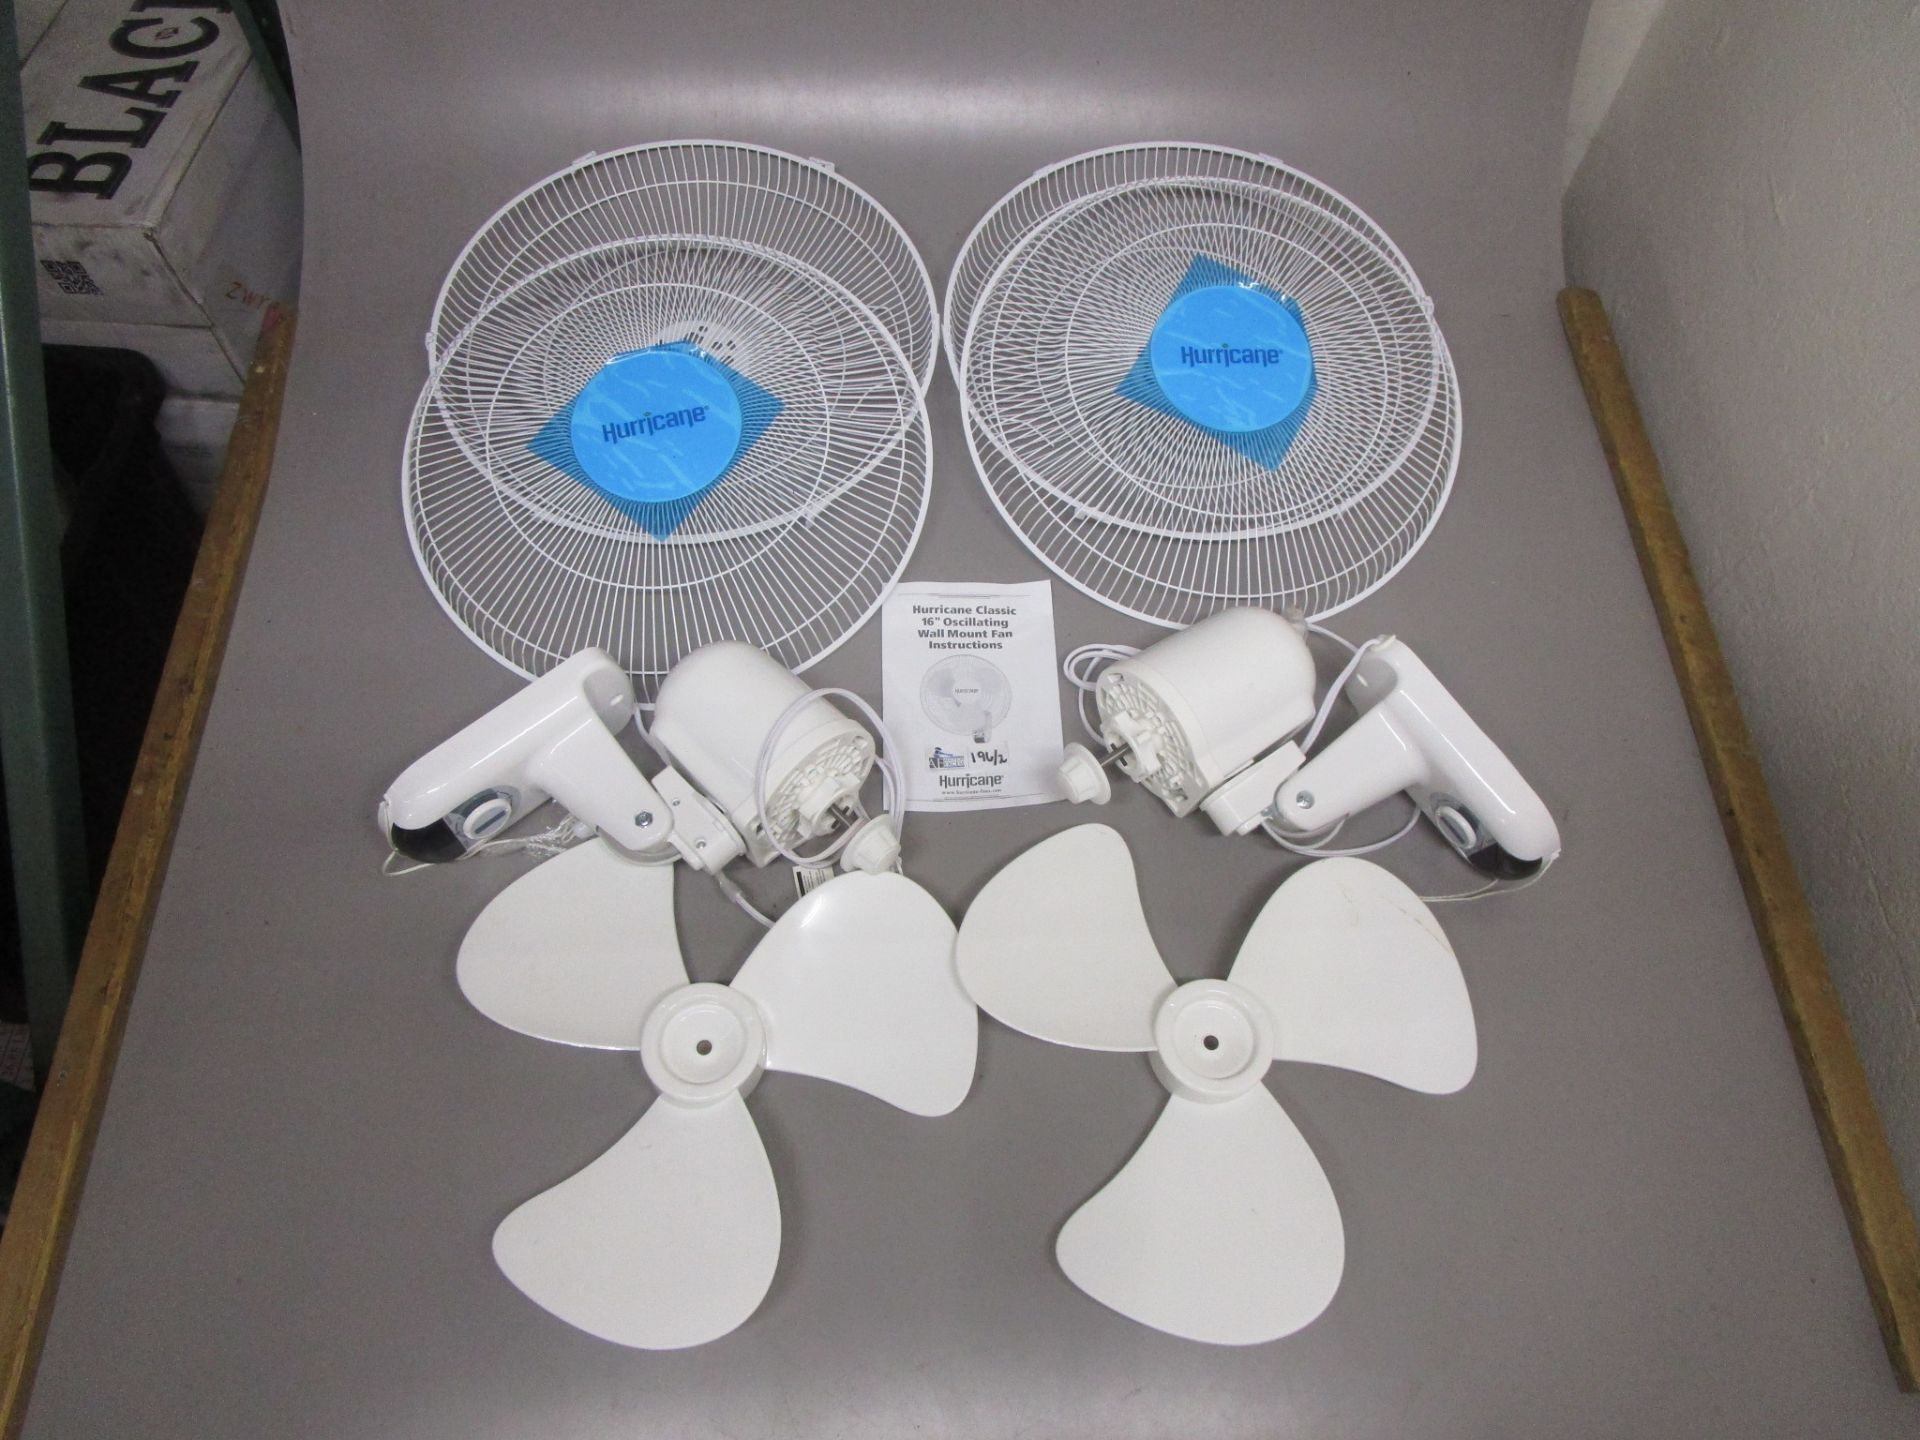 LOT OF 2 HURRICANE WALL FANS IN ORIGINAL BOXES - Image 2 of 4